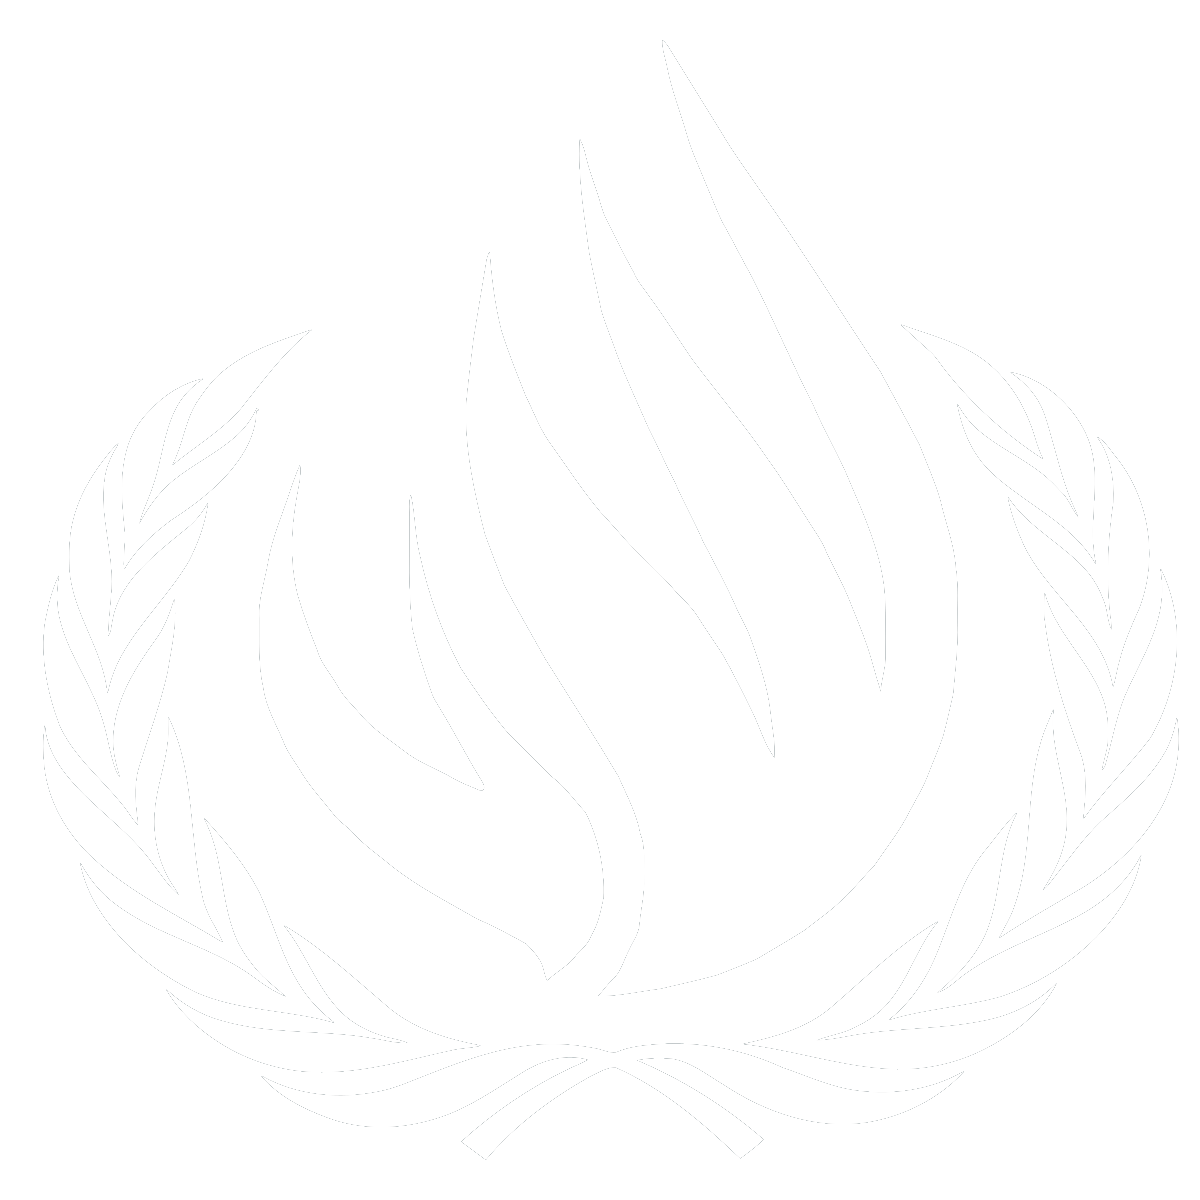 UNHRC THE GOVERNMENT LAW COLLEGE MODEL UNITED NATIONS